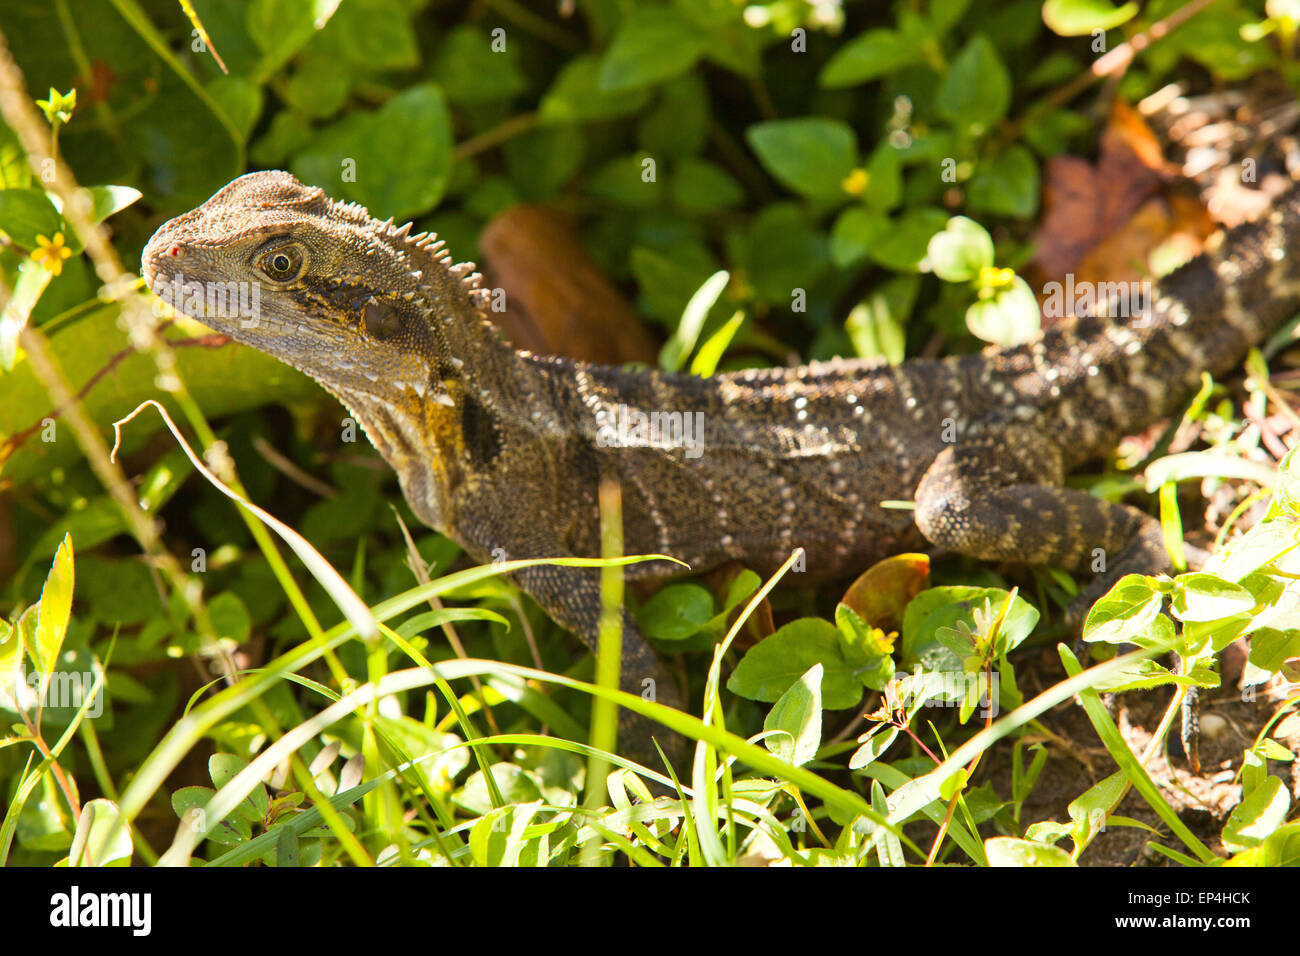 A close up of a lizard sitting in the grass somewhere in Australia. Stock Photo